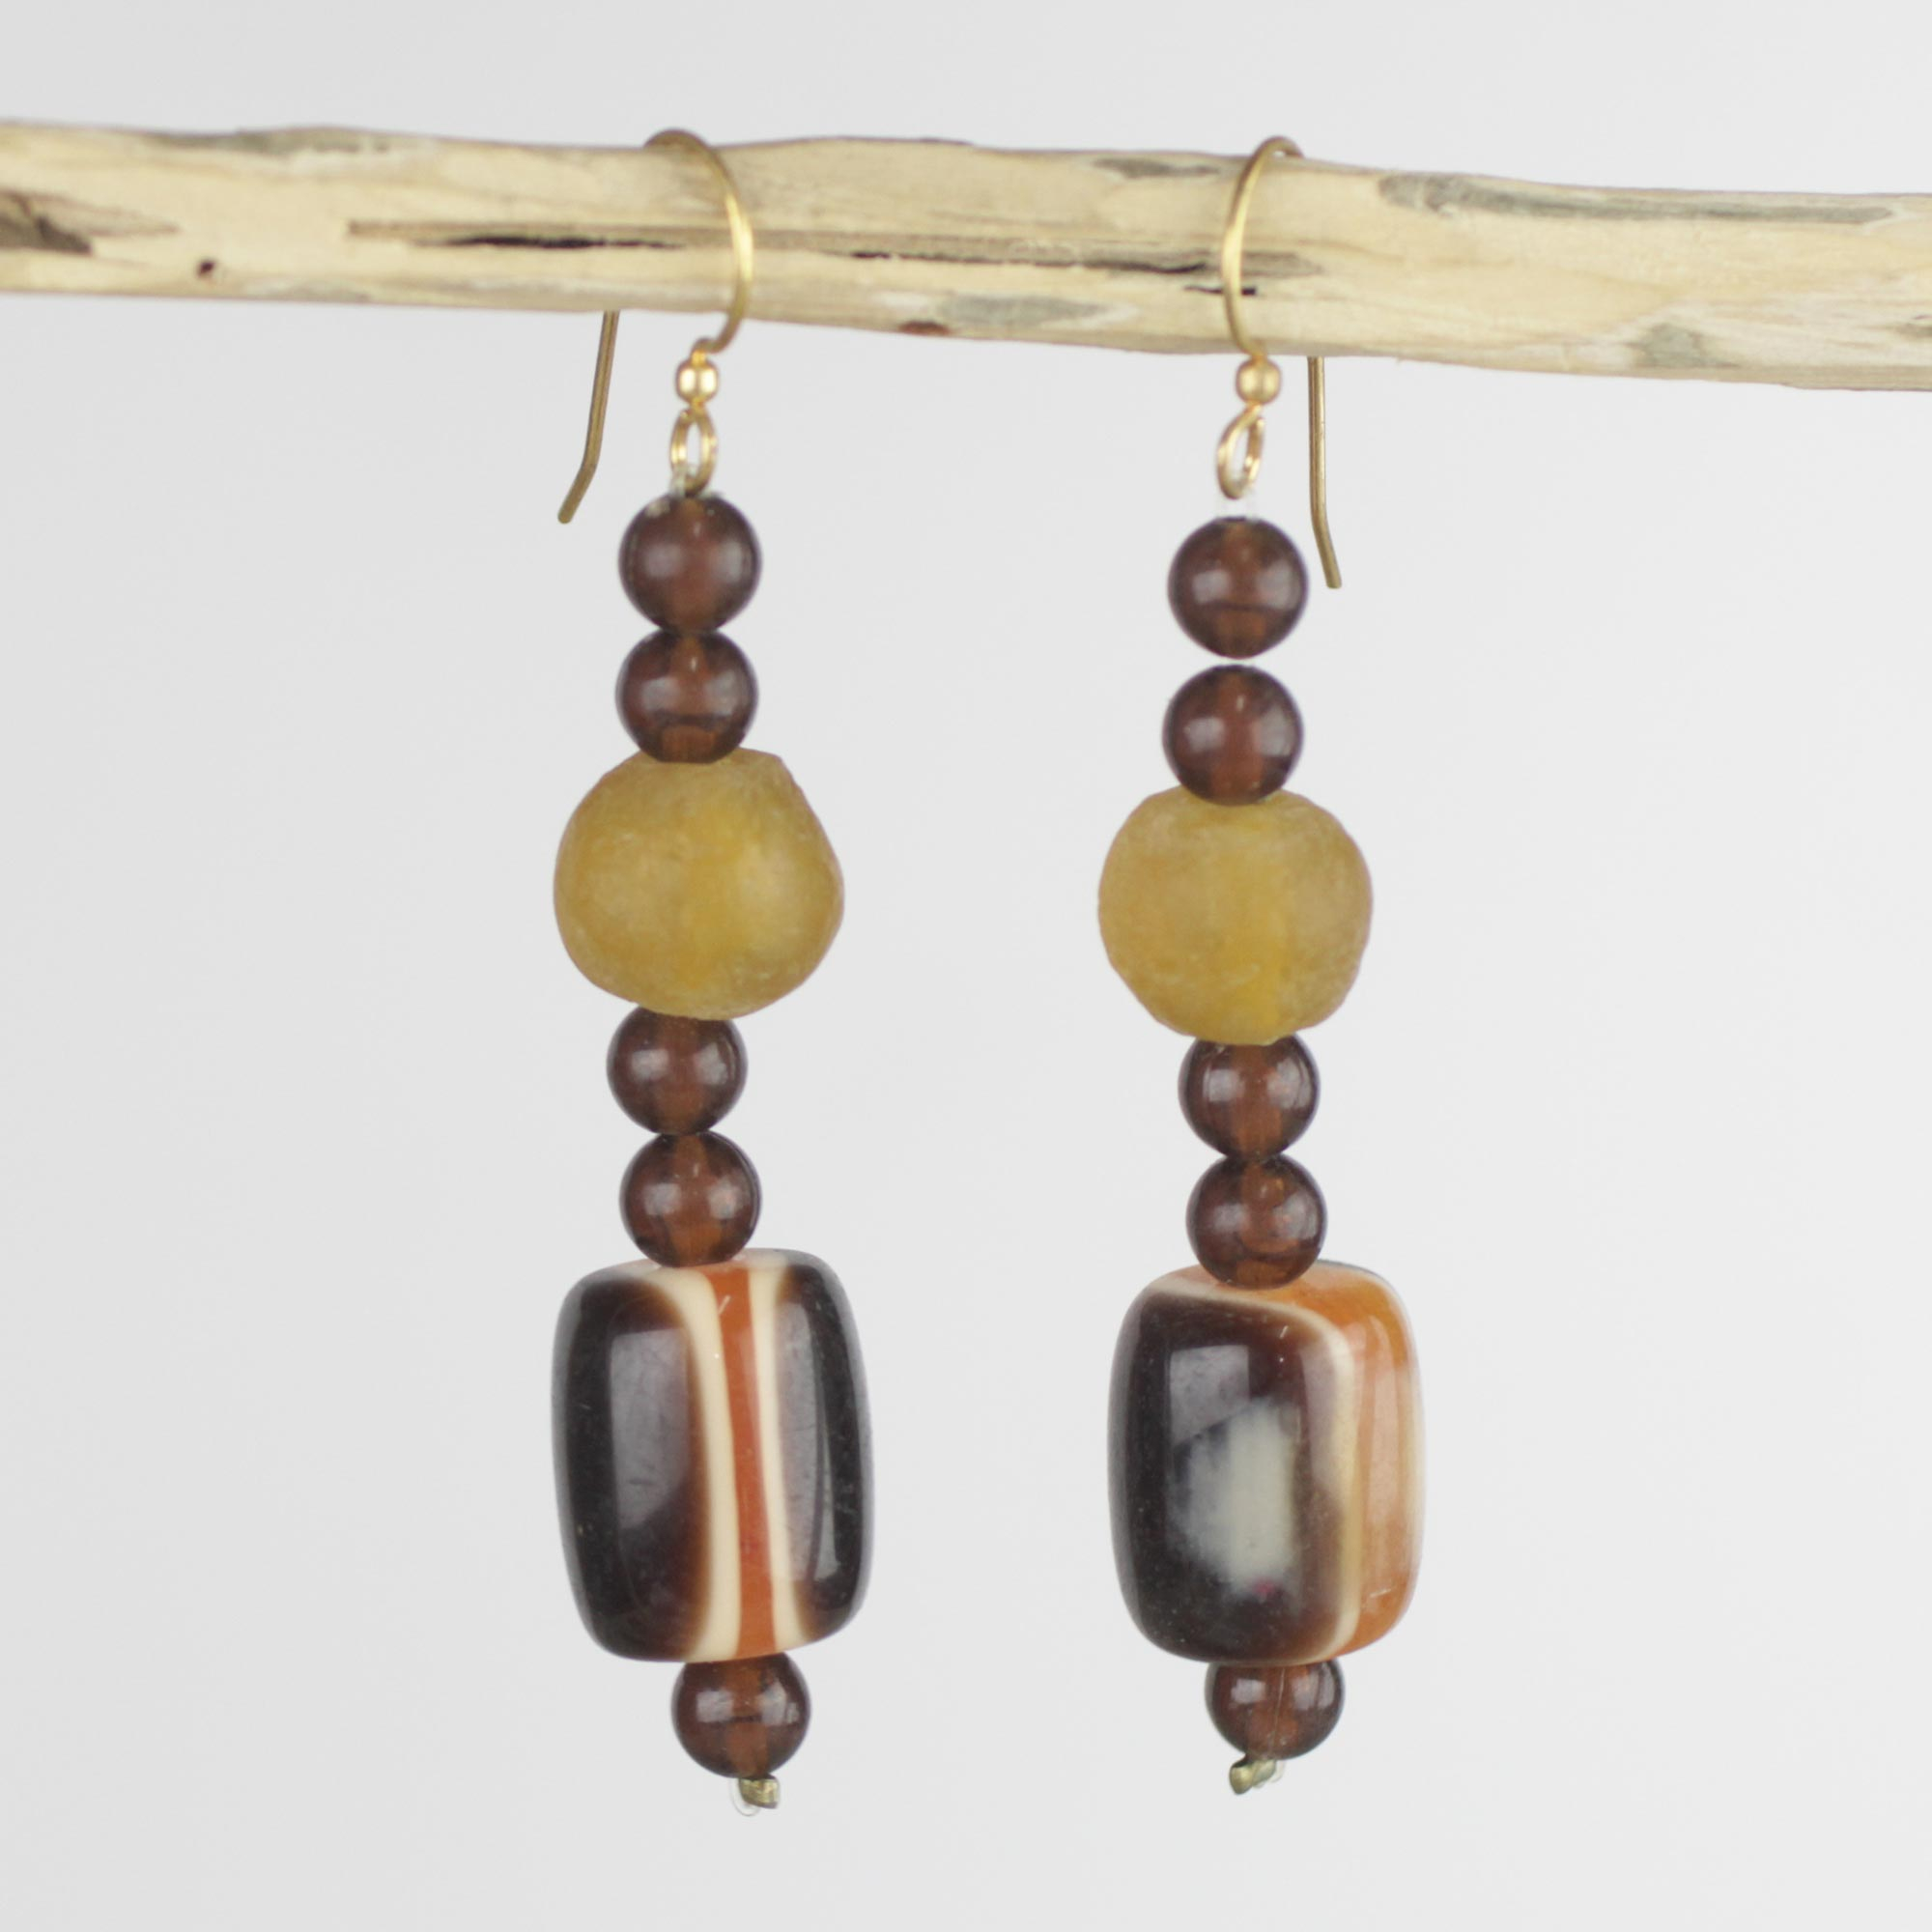 Yellow African Handcrafted Eco Friendly Earrings - Destiny Loves